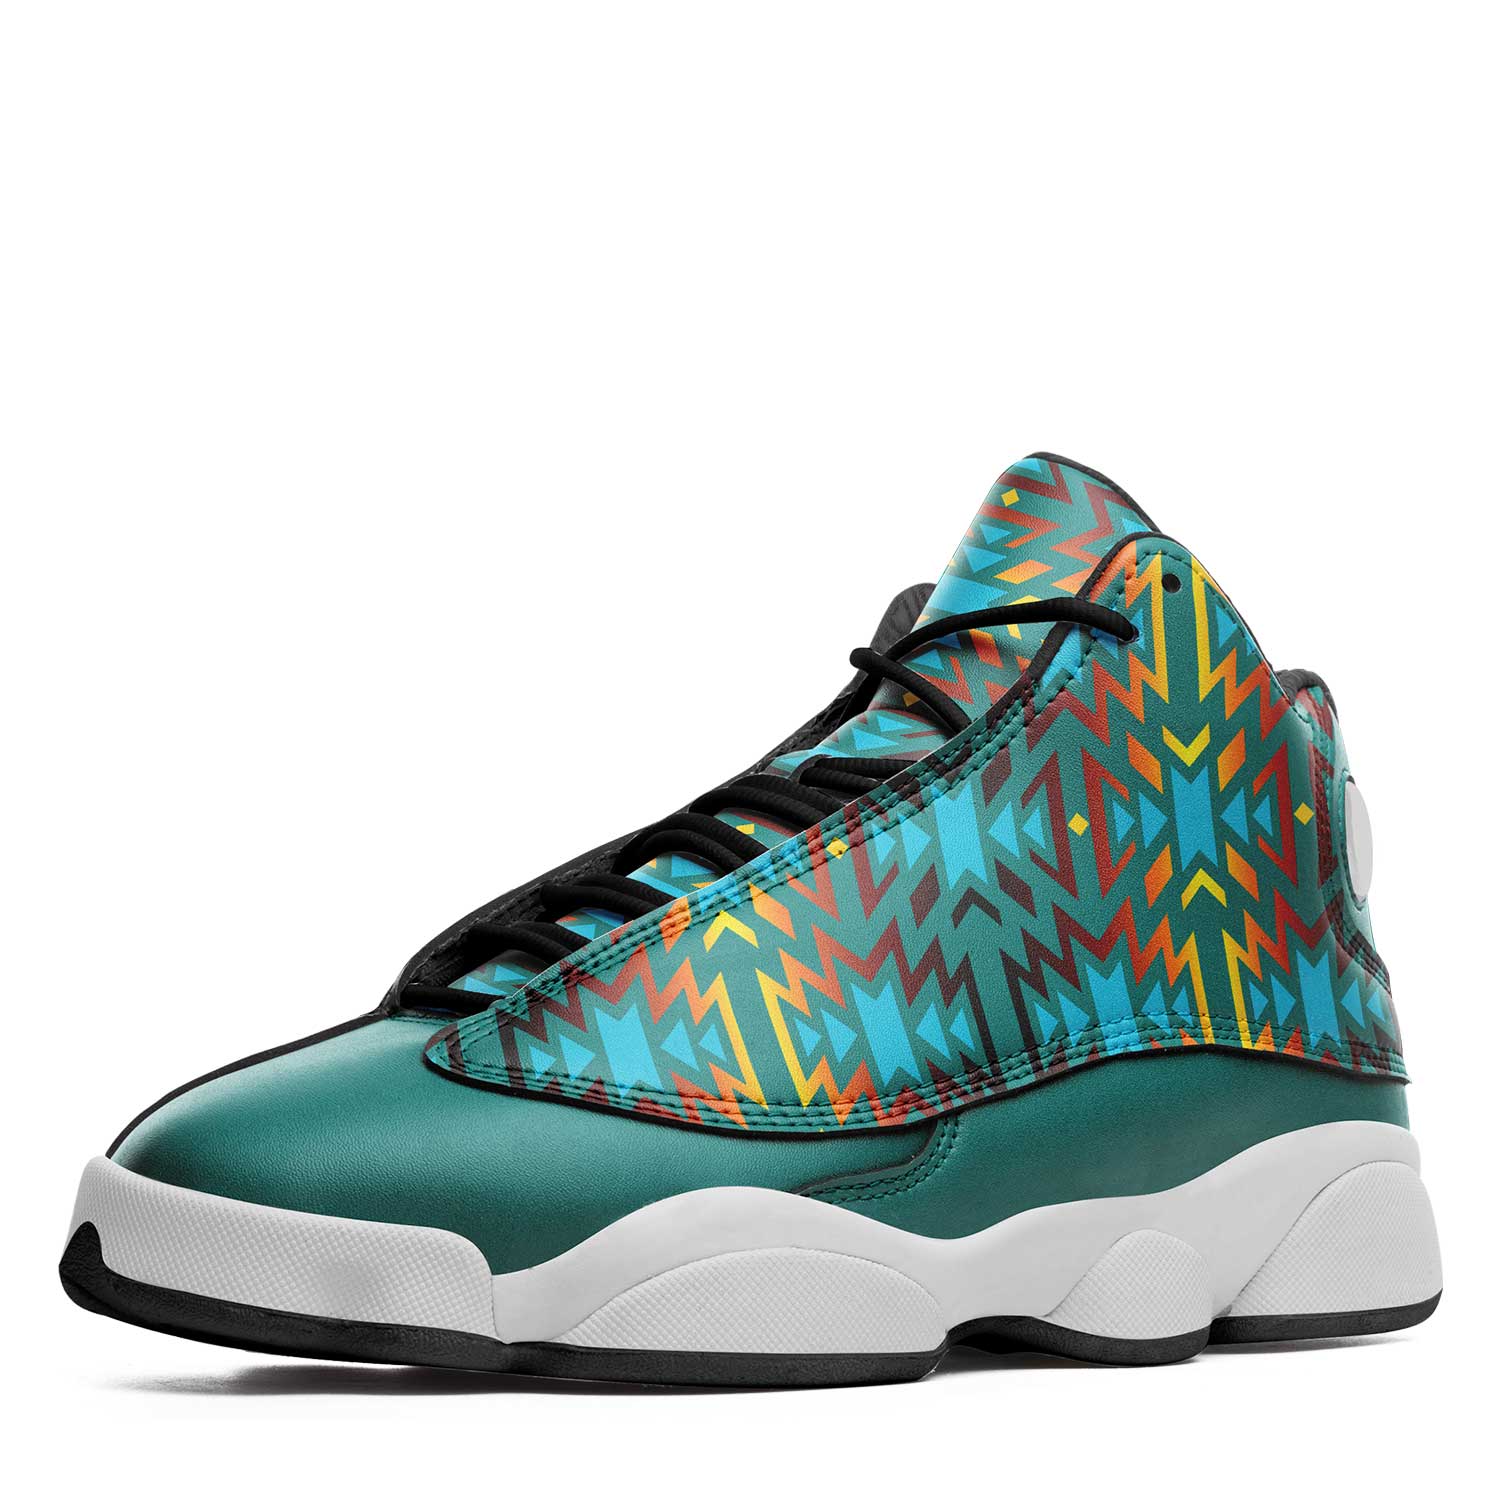 Fire Colors and Turquoise Teal Athletic Shoes Herman 